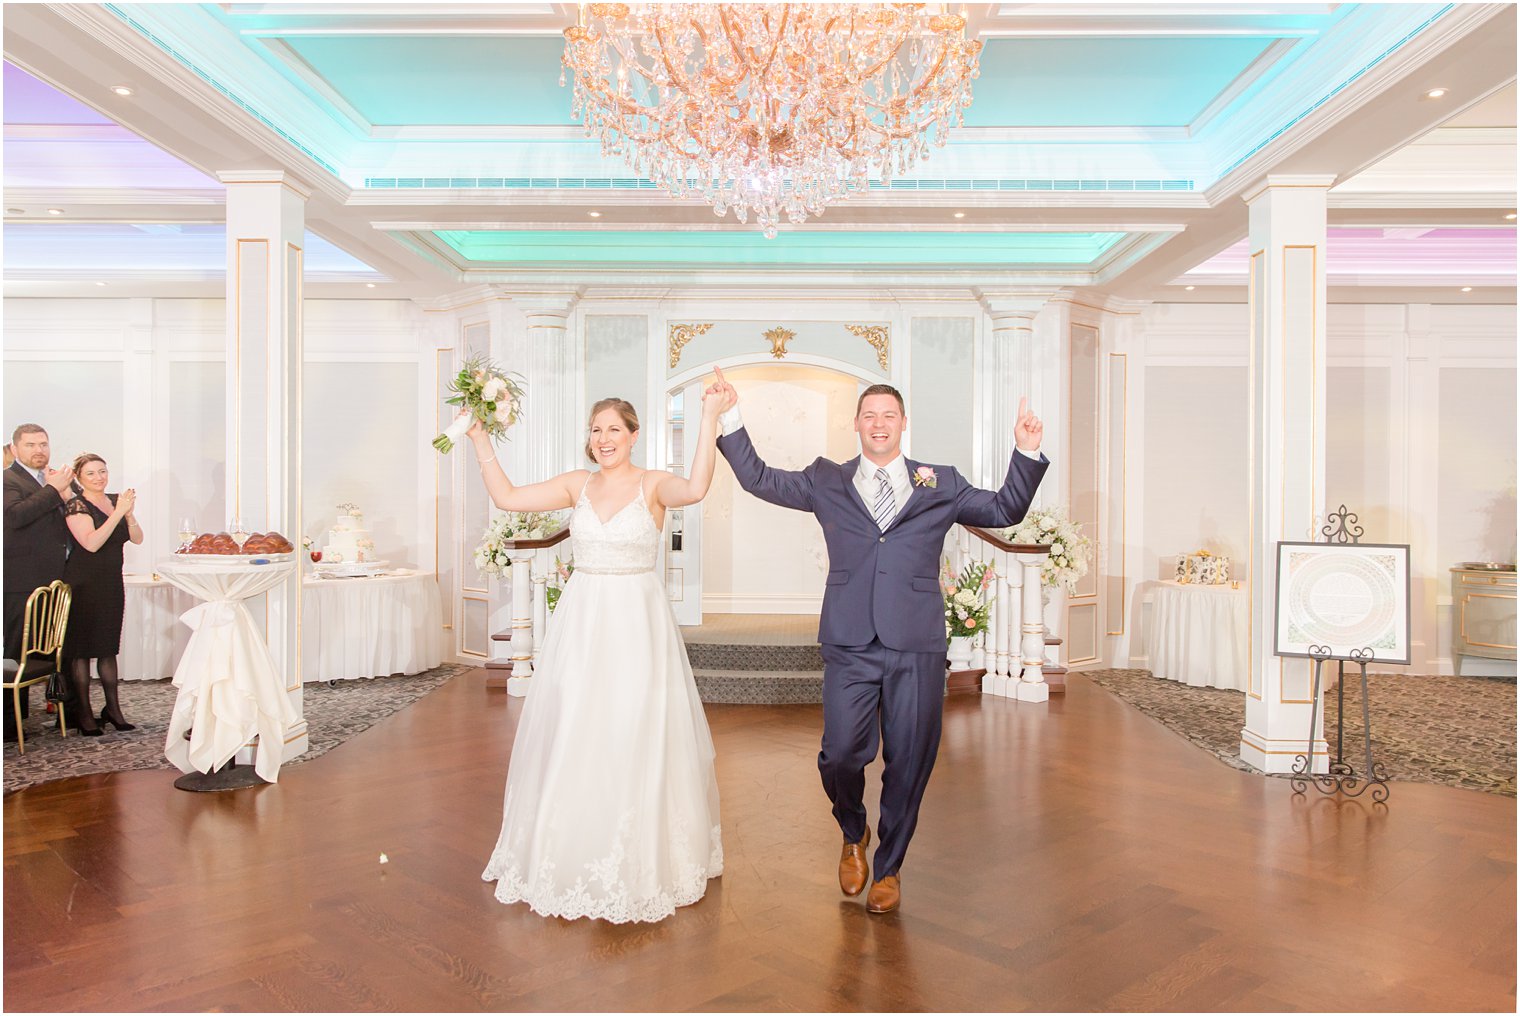 Bride and groom walking into reception at The Mill Lakeside Manor